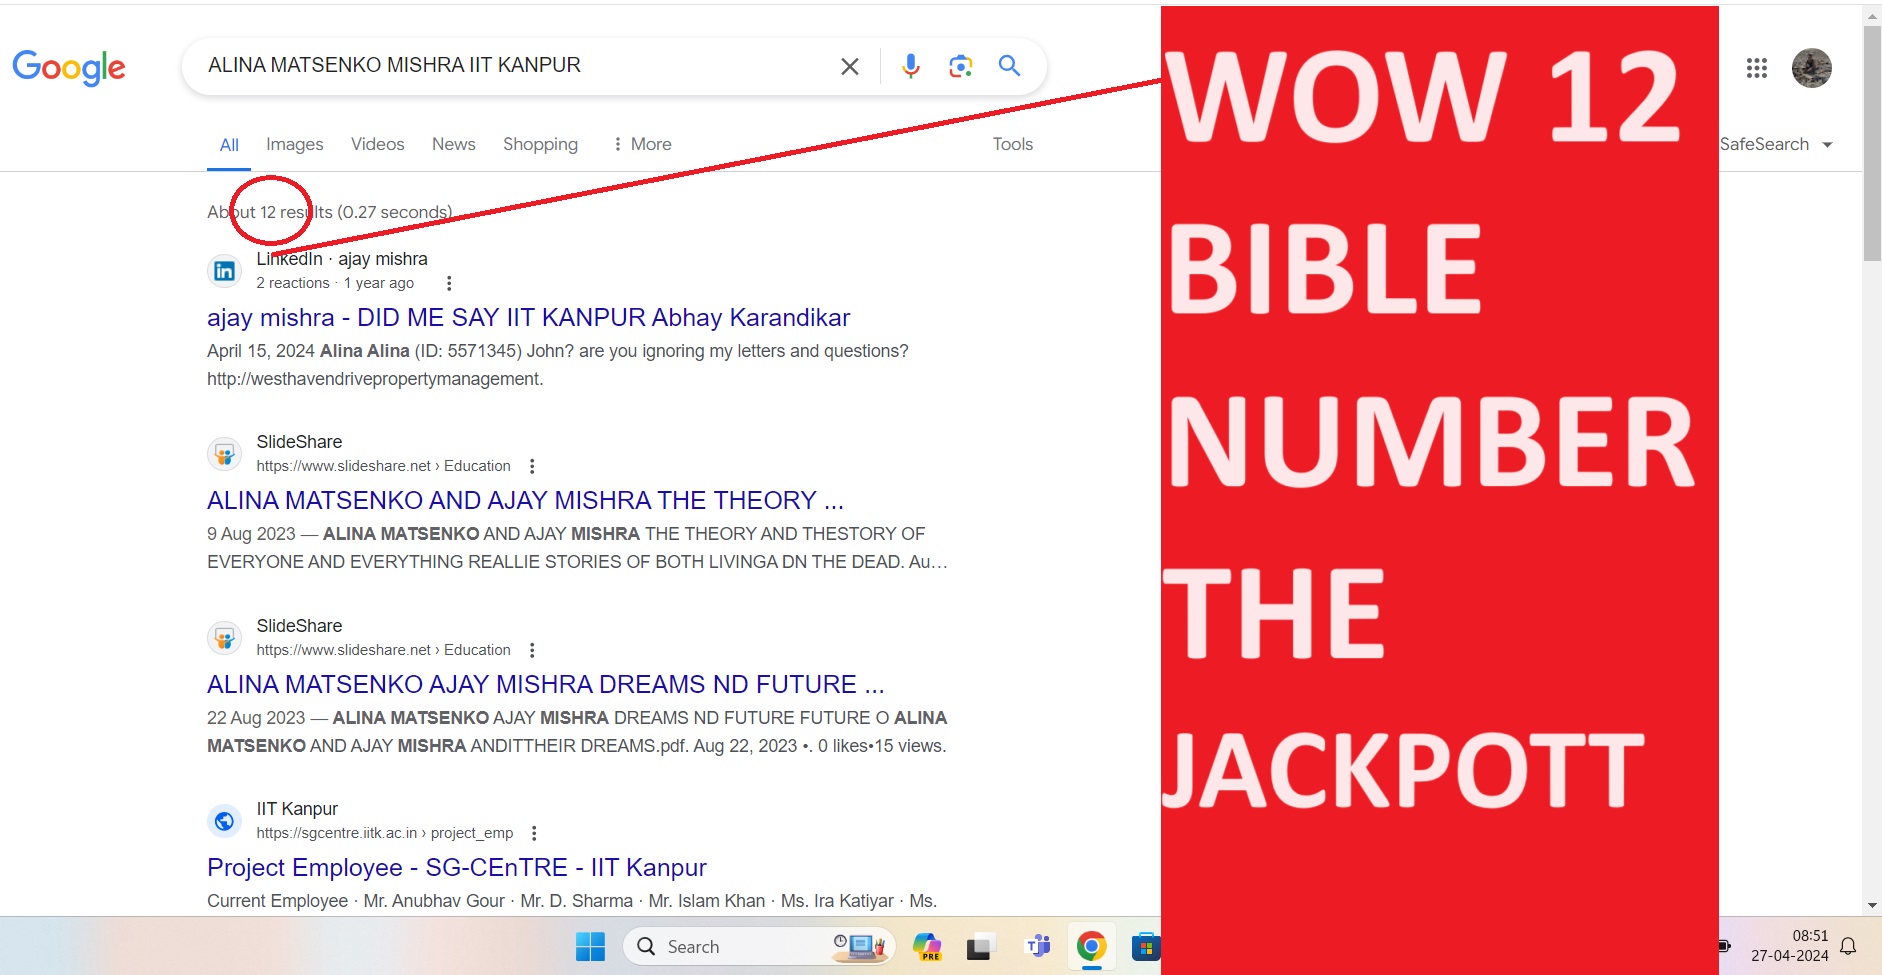 ALINA MATSENKO MISHRA IIT KANPUR WOW 12 THE BIBLE NUMBER THE JACKPOT REGRDAS 87014 THE 1987 GUASSIAN PRIME NUMBER AND 643361467 AND INSEAD IS